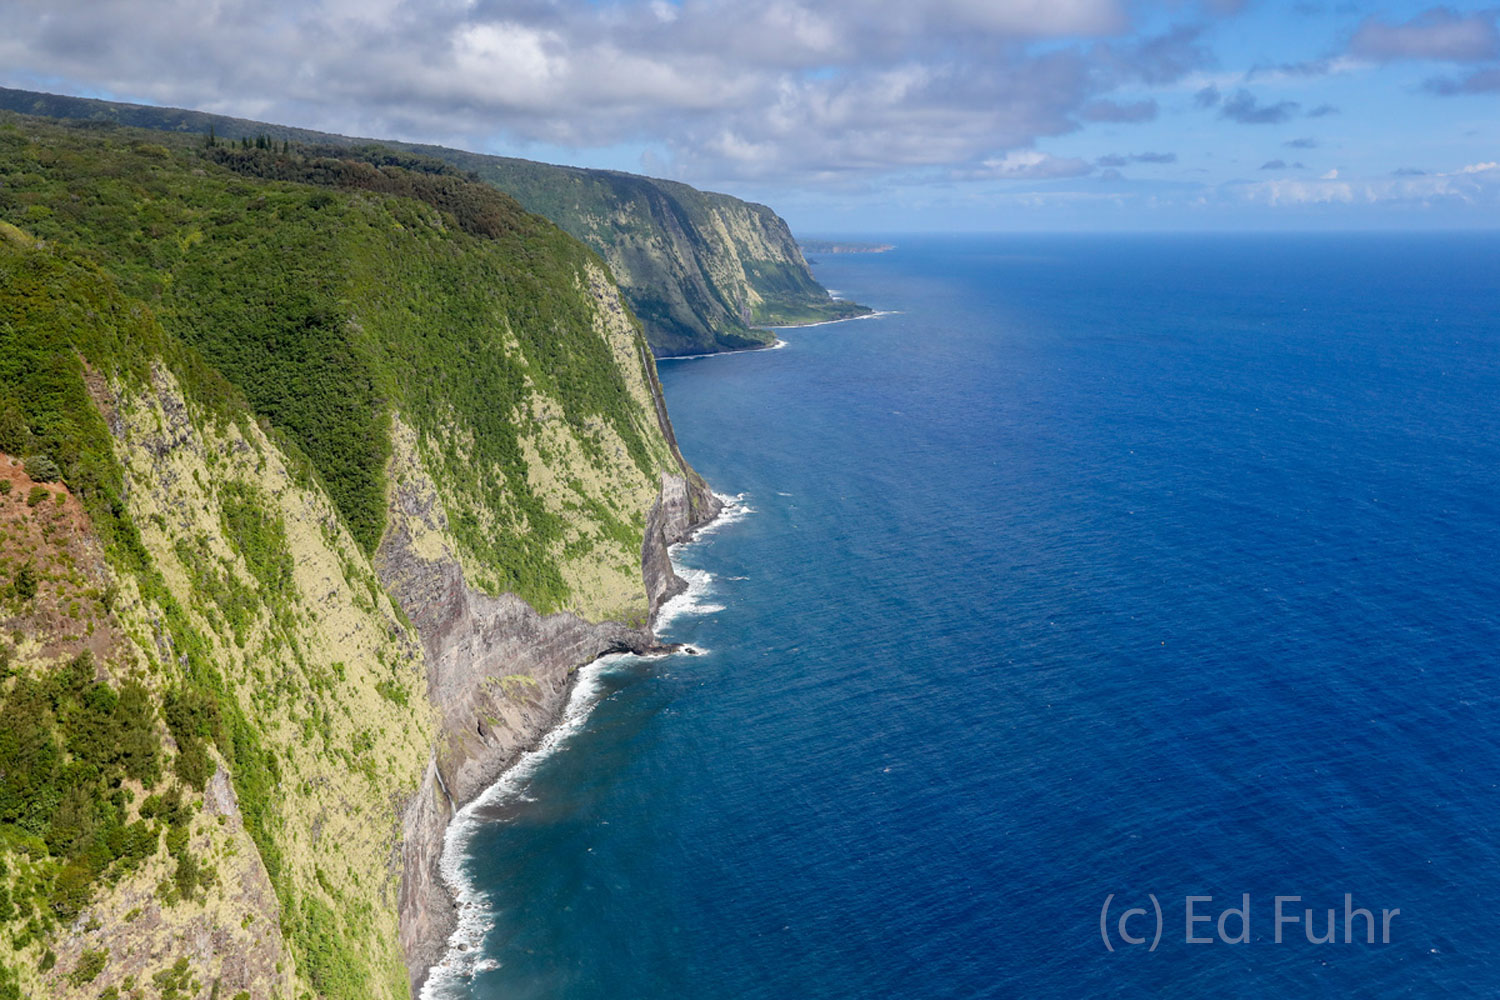 The Hamakua coast is breathtaking with its sheer cliff walls dropping into the ocean.